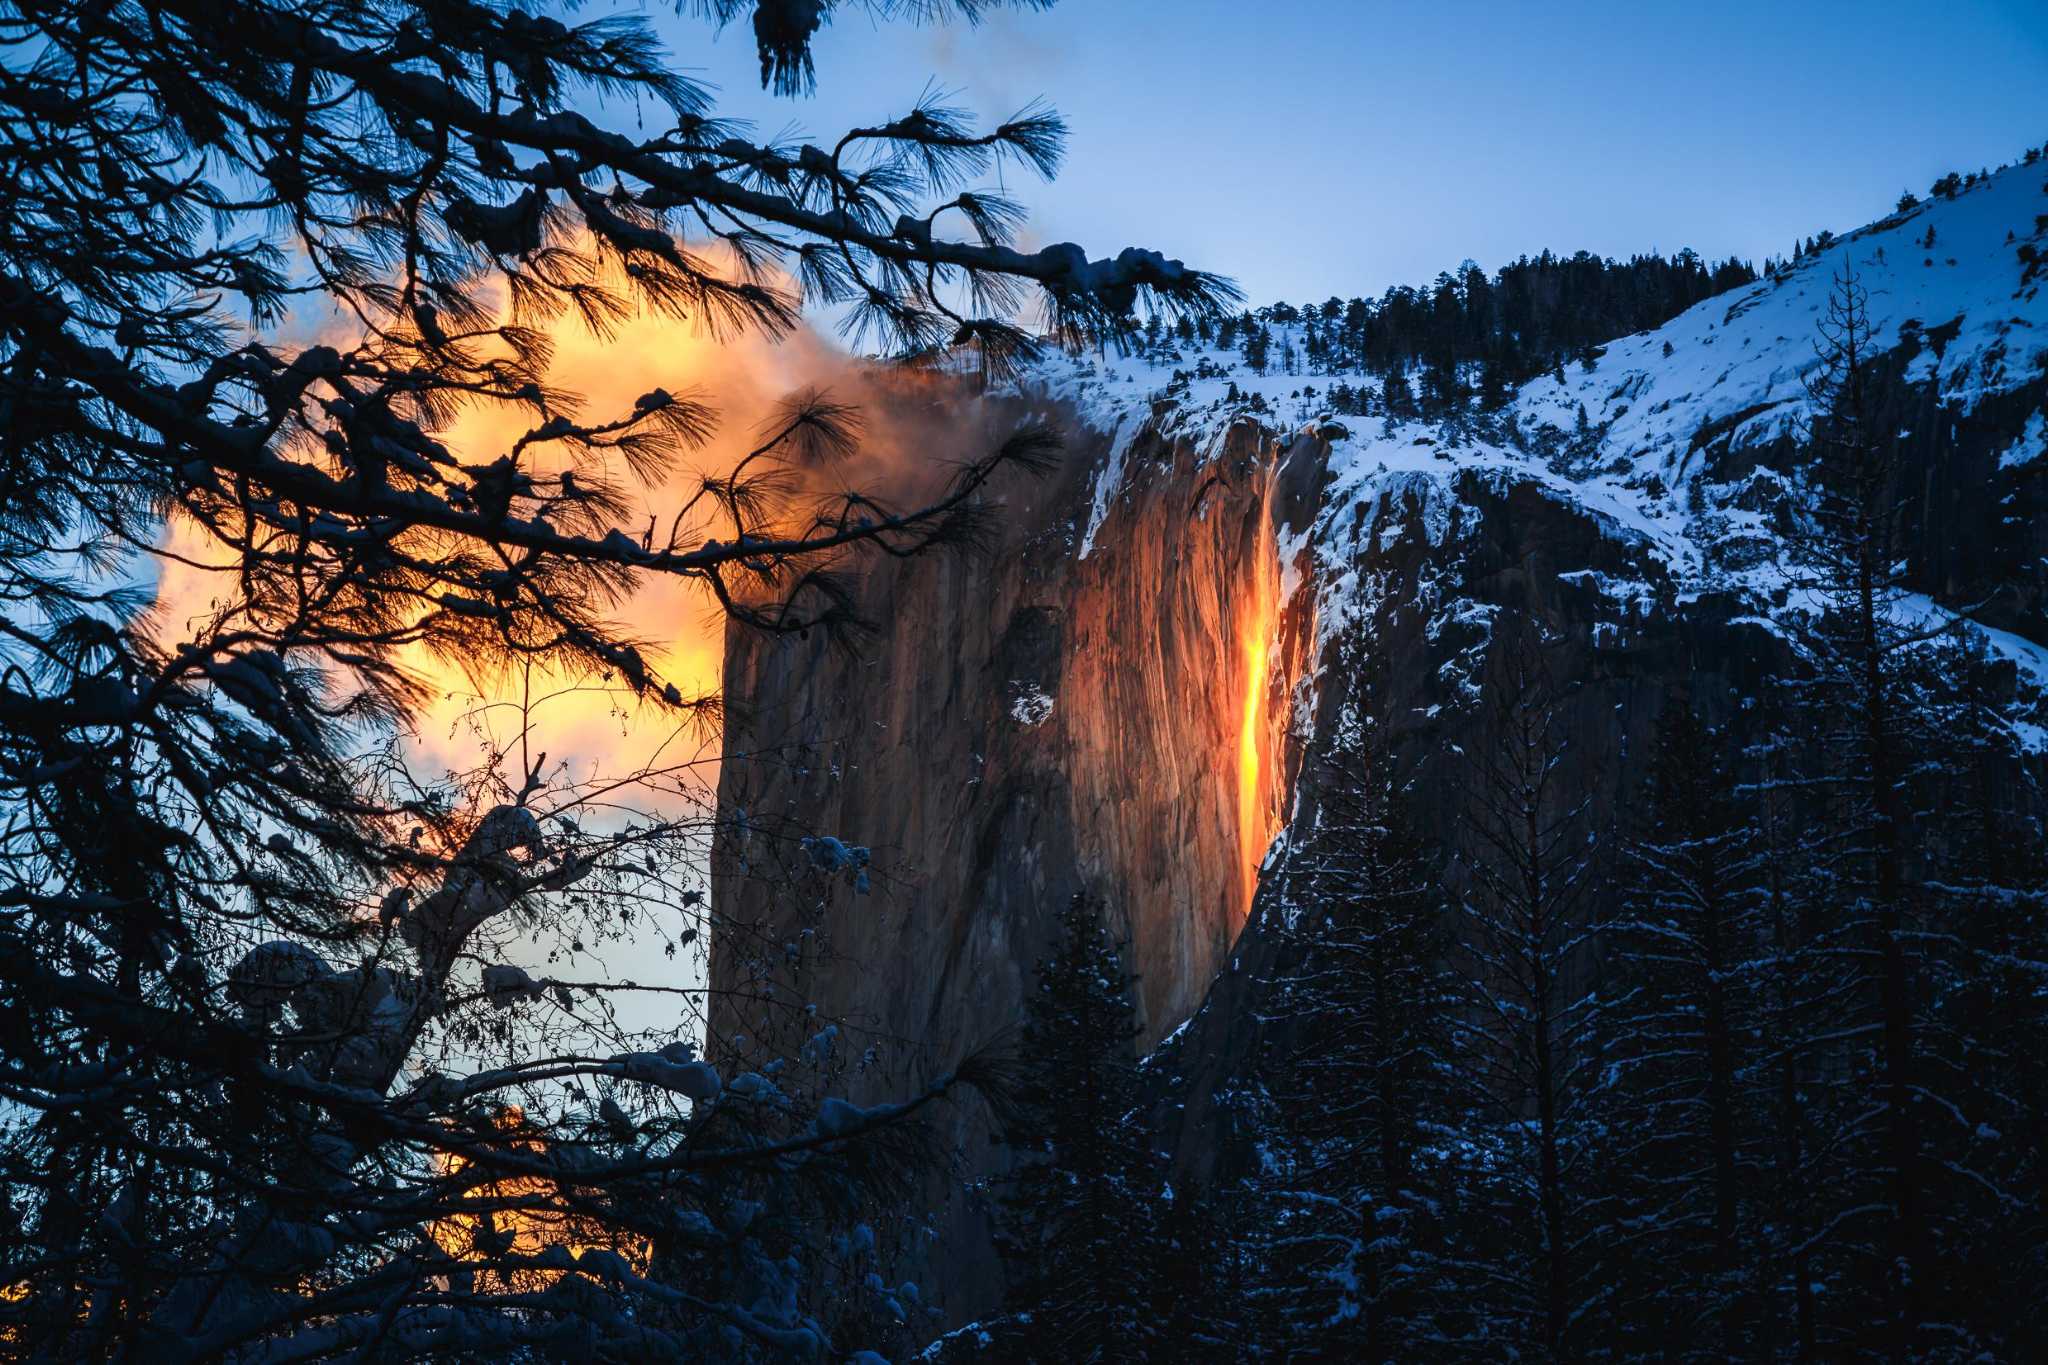 Seeing Yosemite National Park's Firefall requires a reservation